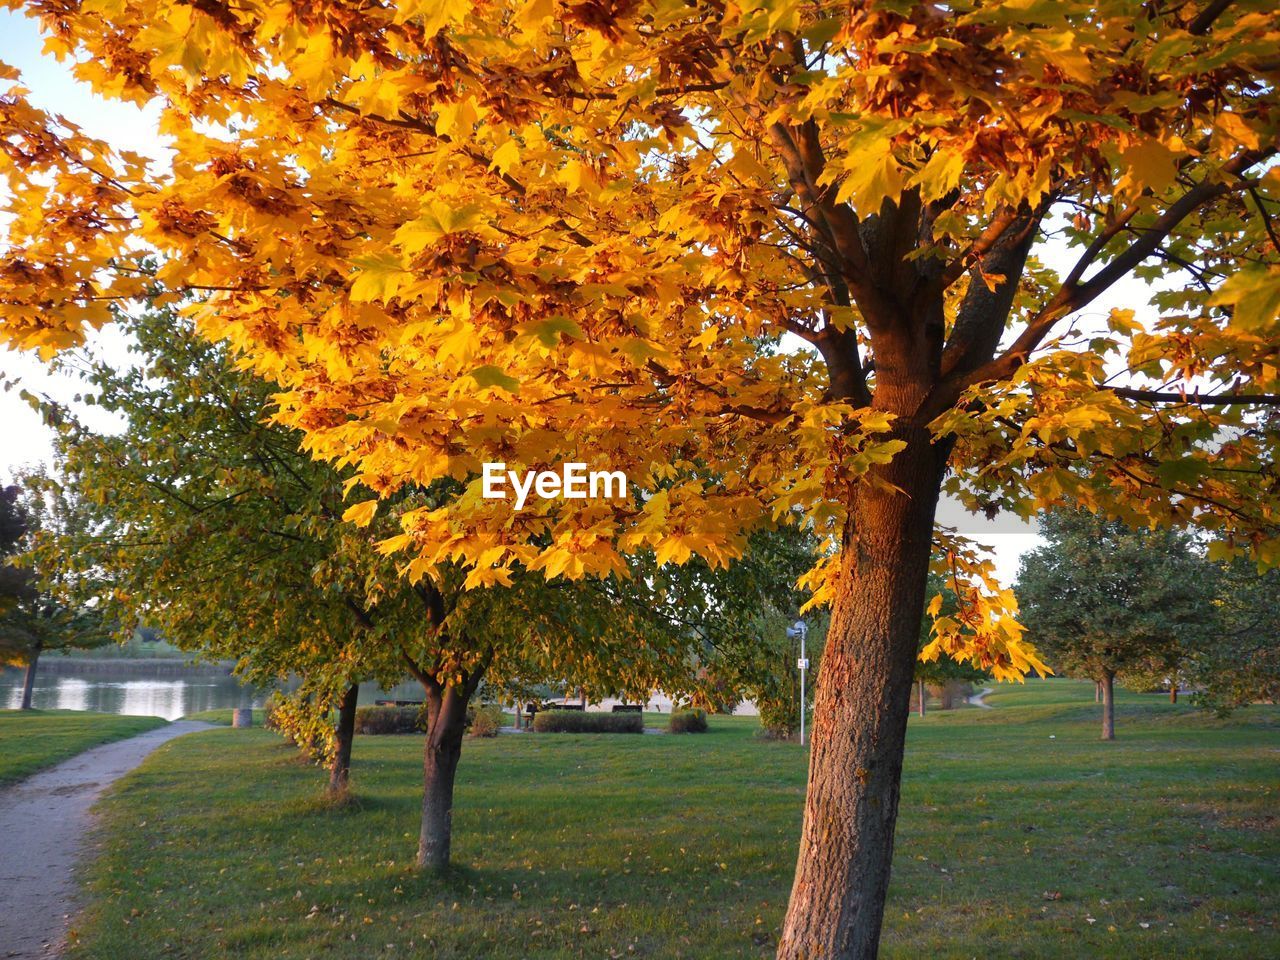 Trees growing in park during autumn